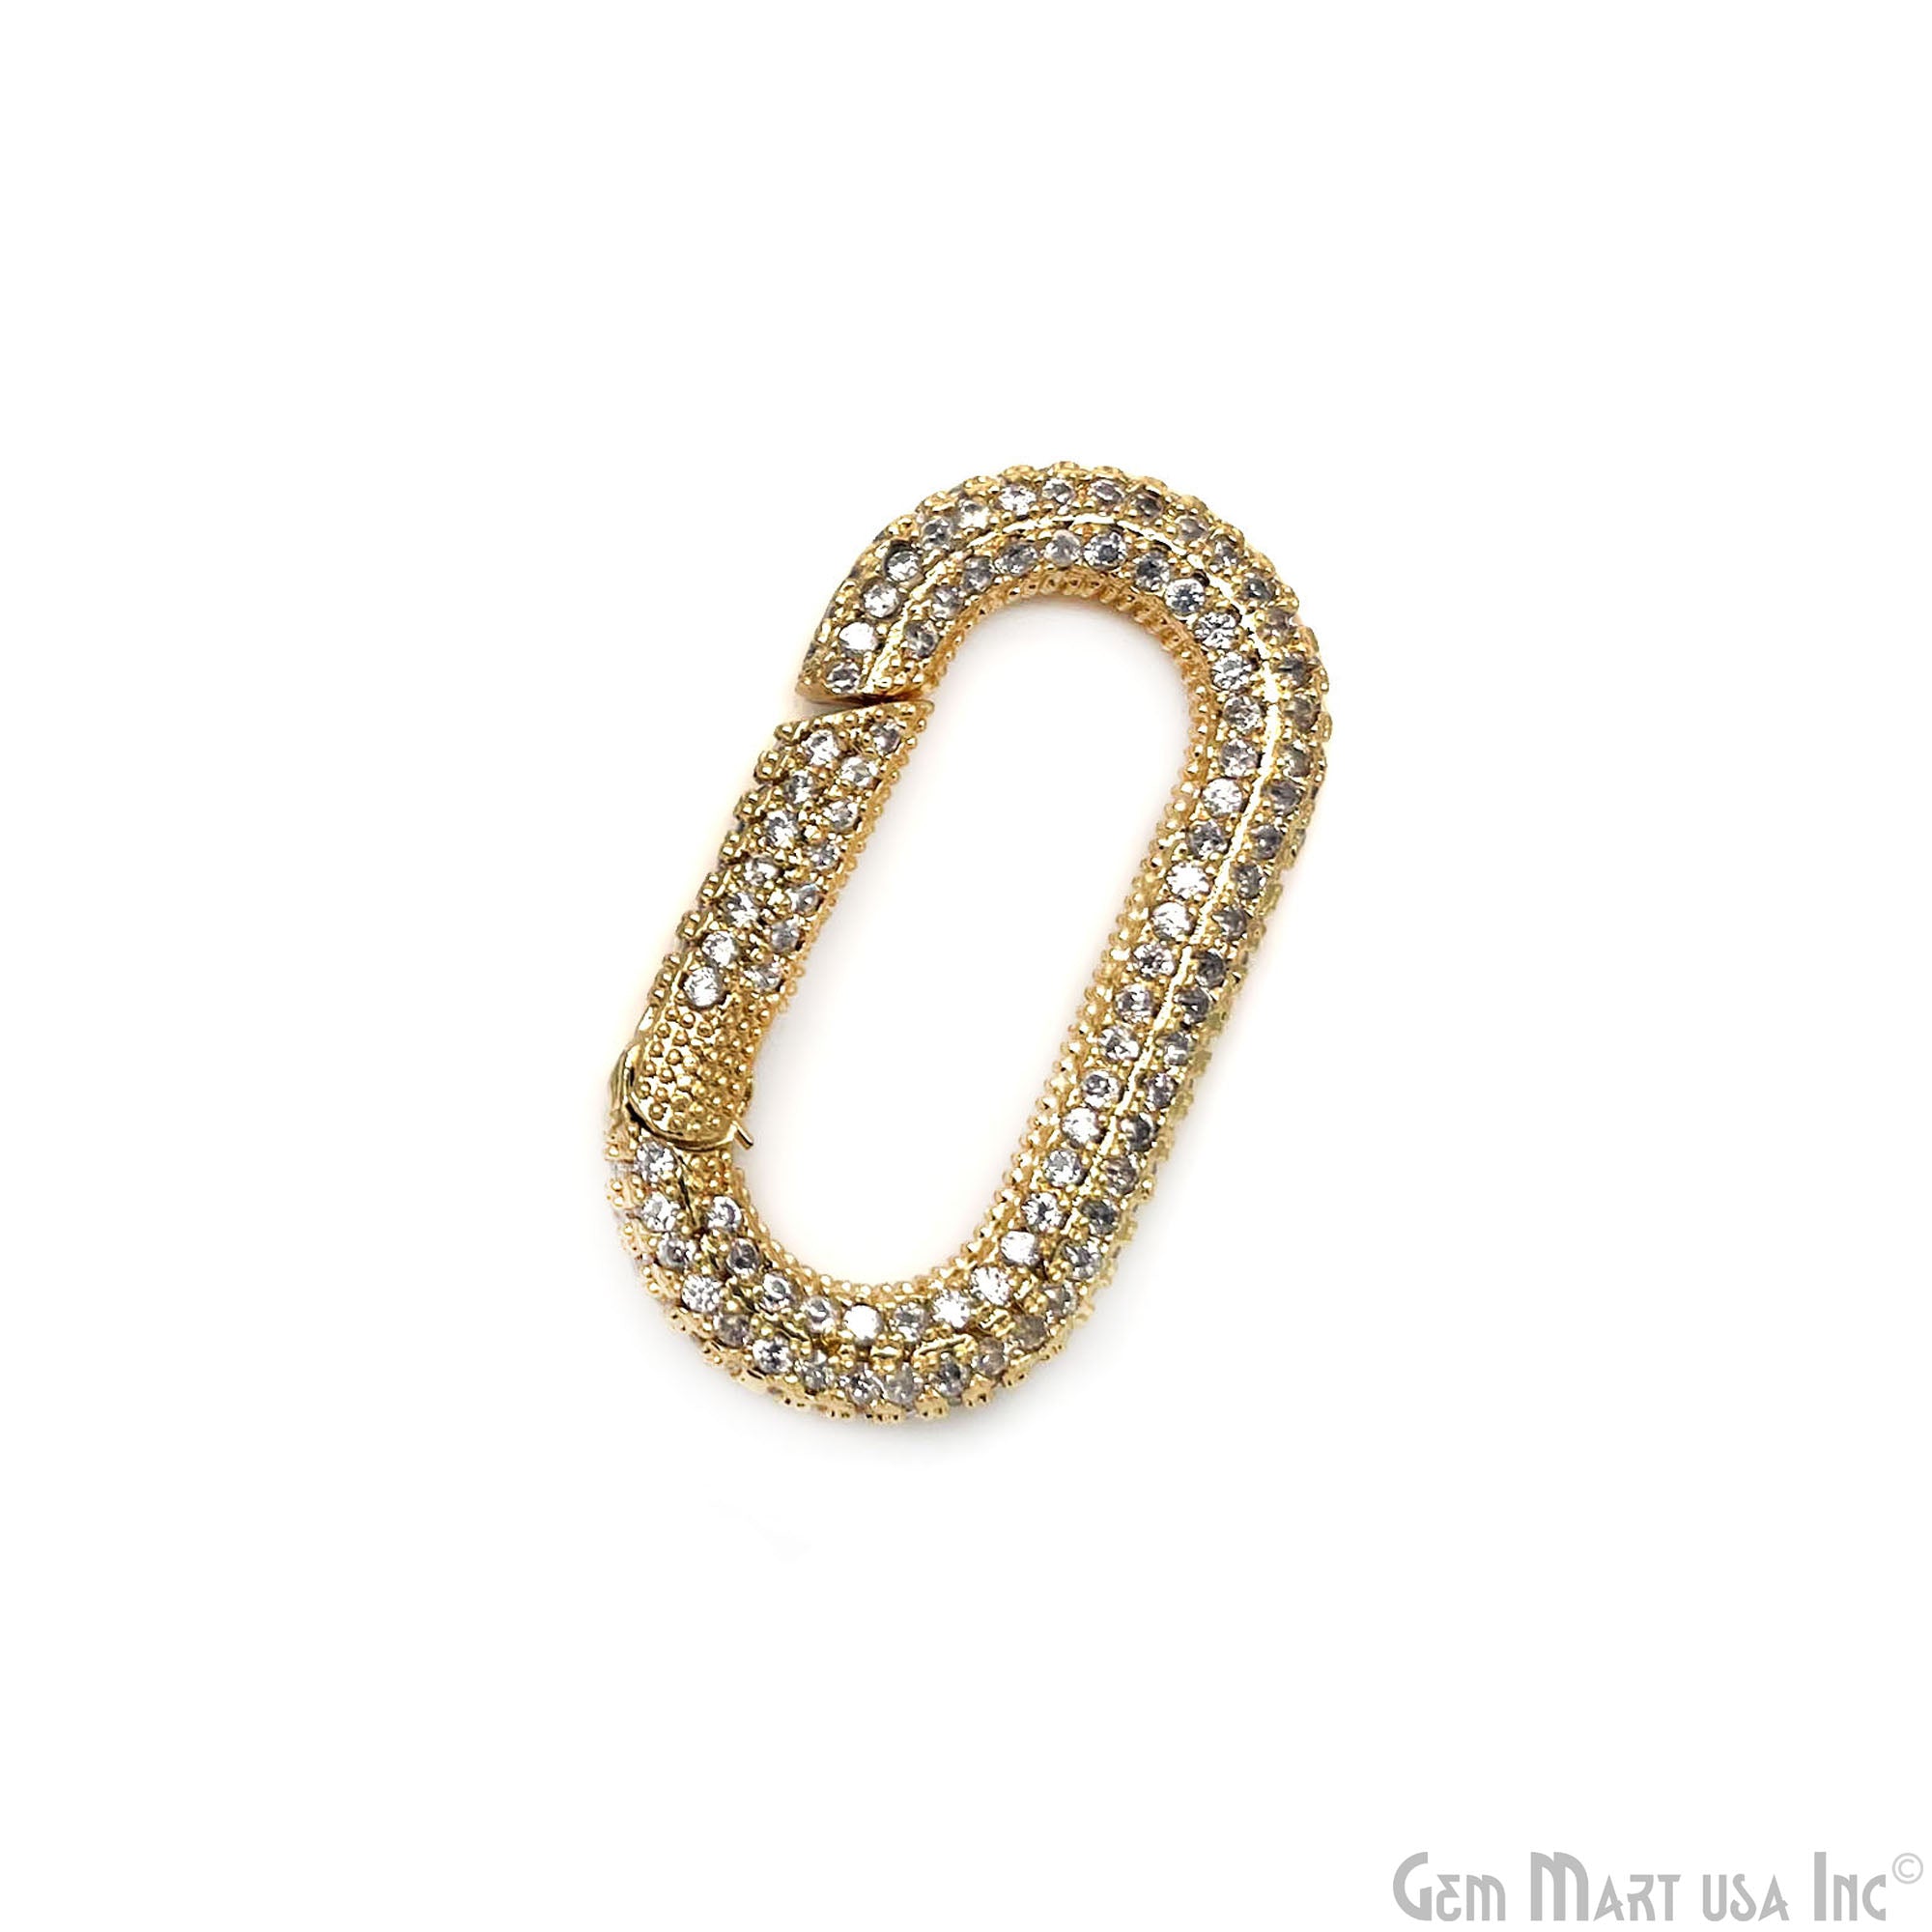 Dainty Gold Spring Gate Ring-Oval Push Gate Ring-Jewelry Making Findings